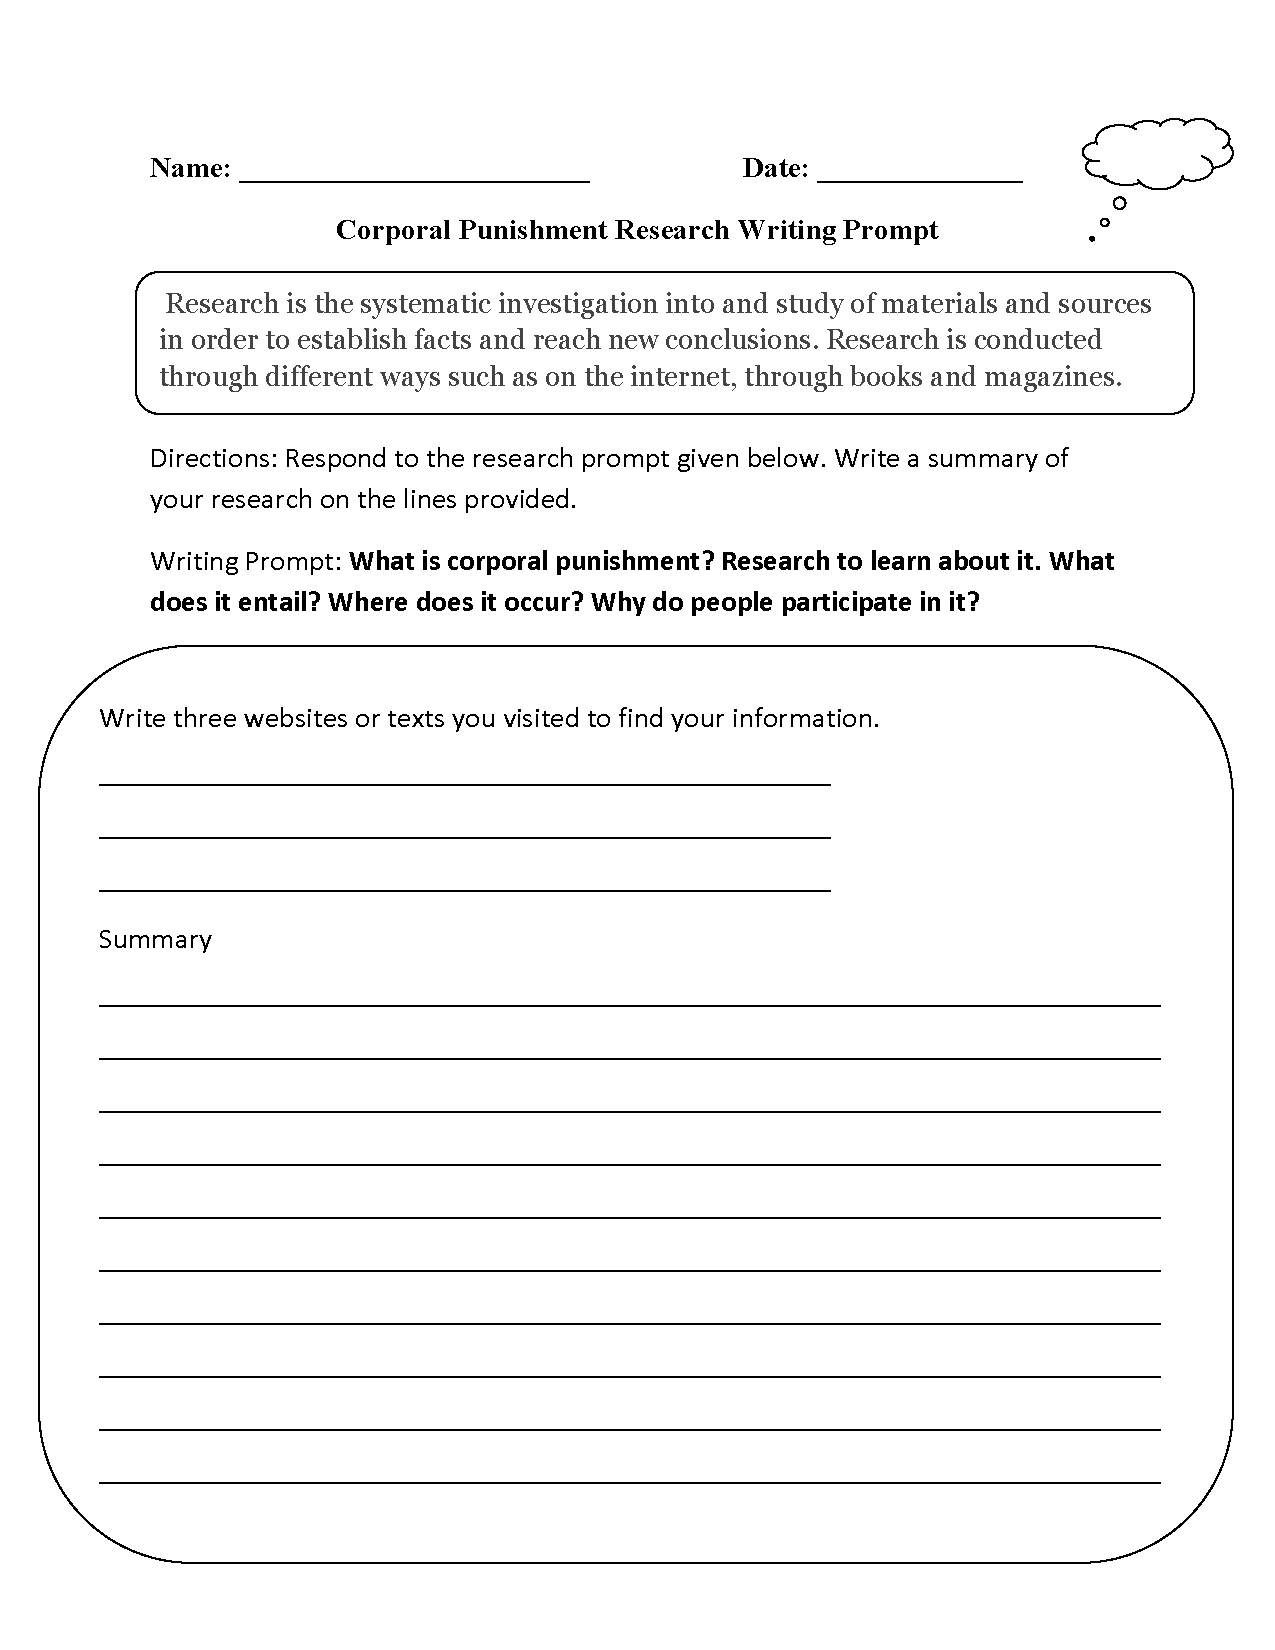 Corporal Punishment Research Writing Prompts Worksheet